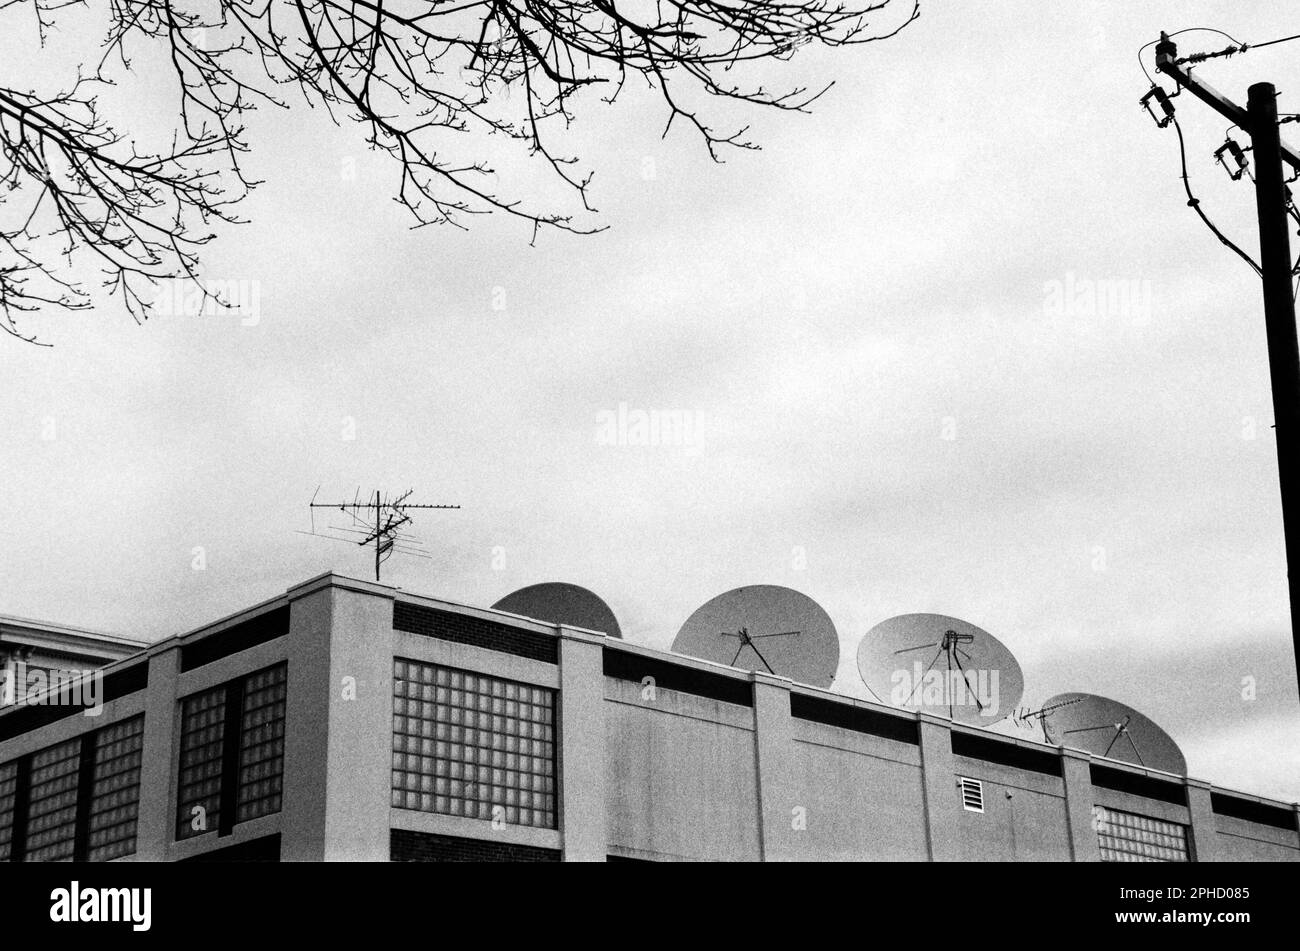 A row of satellite dishes line the roof of a commercial building on Main St. against a dramatic sky in Stoneham, Massachusetts. The image was captured Stock Photo